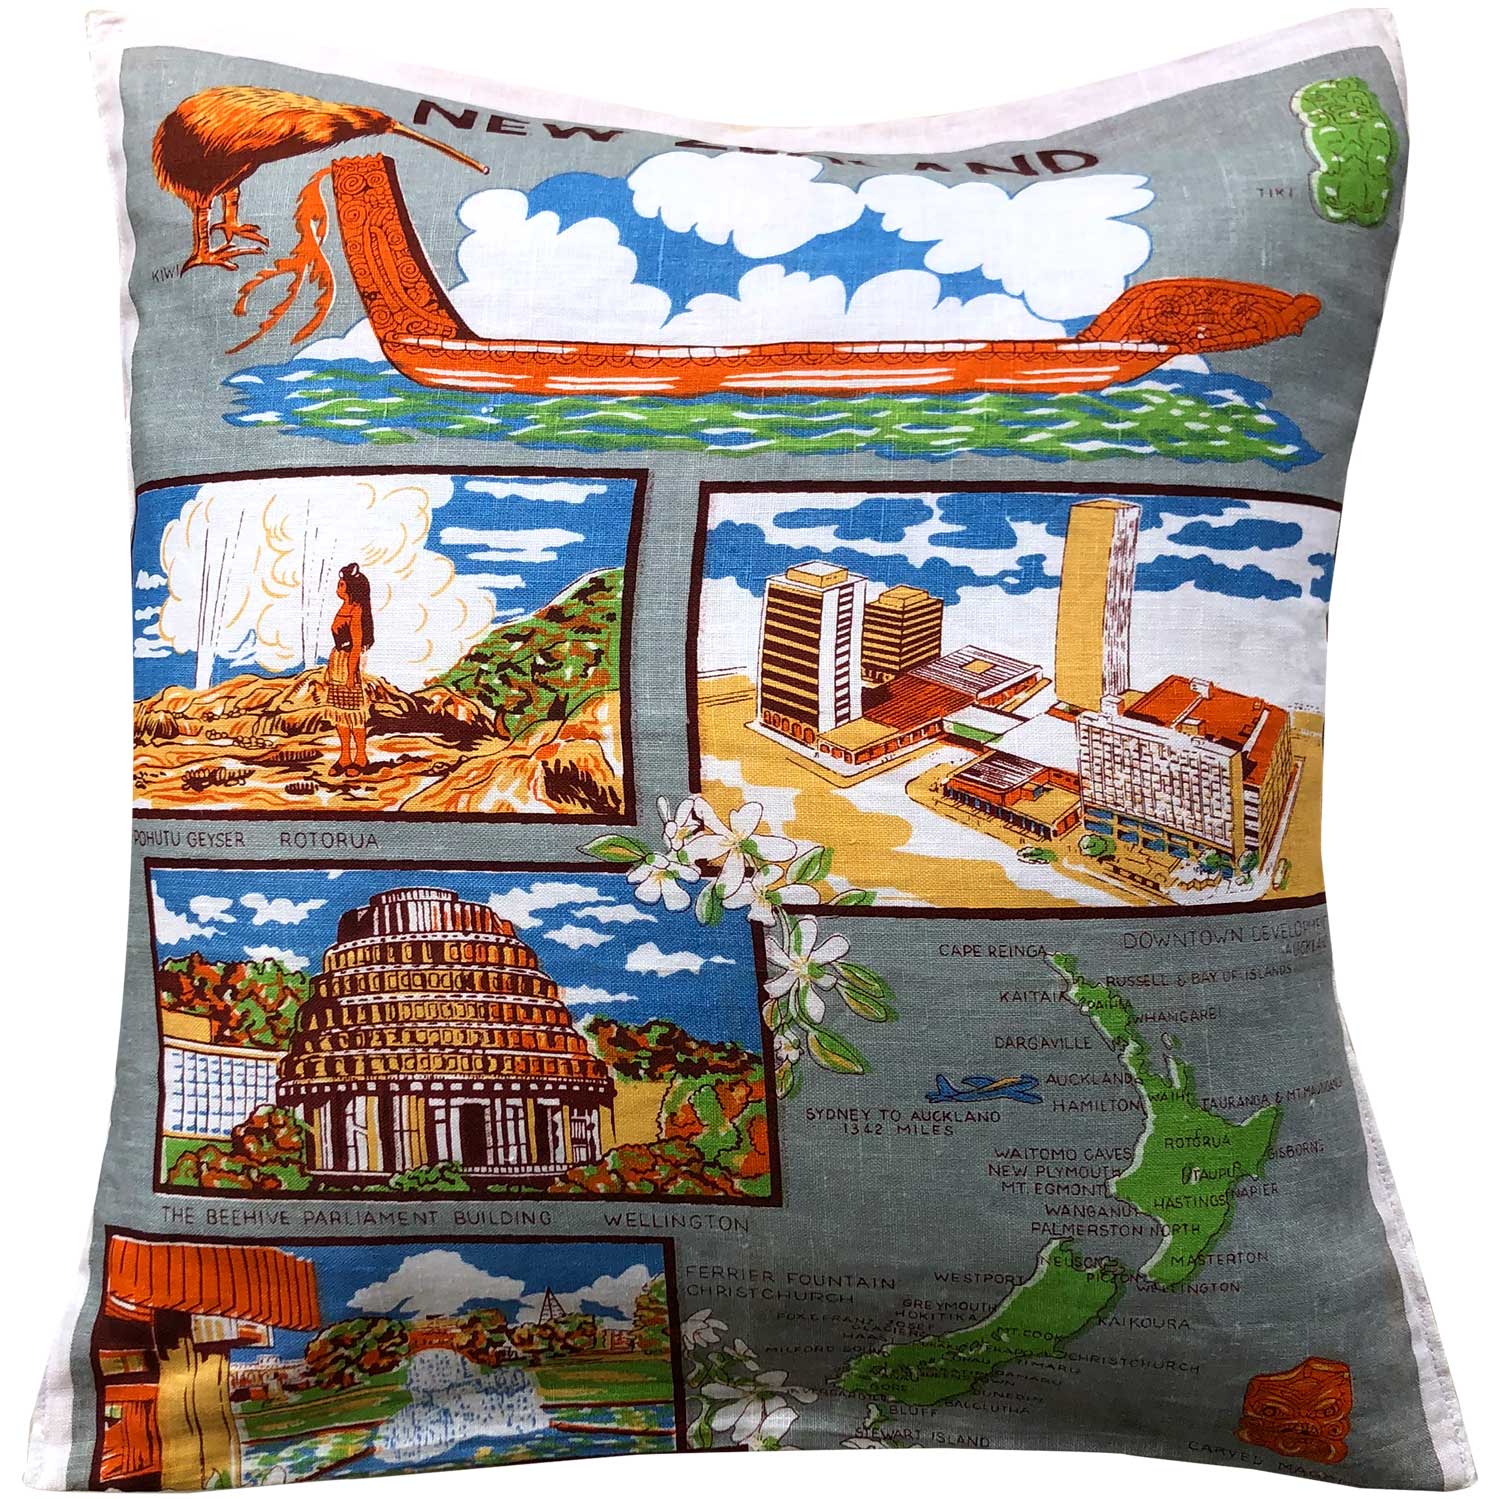 postcards from new zealand vintage linen teatowel cushion cover